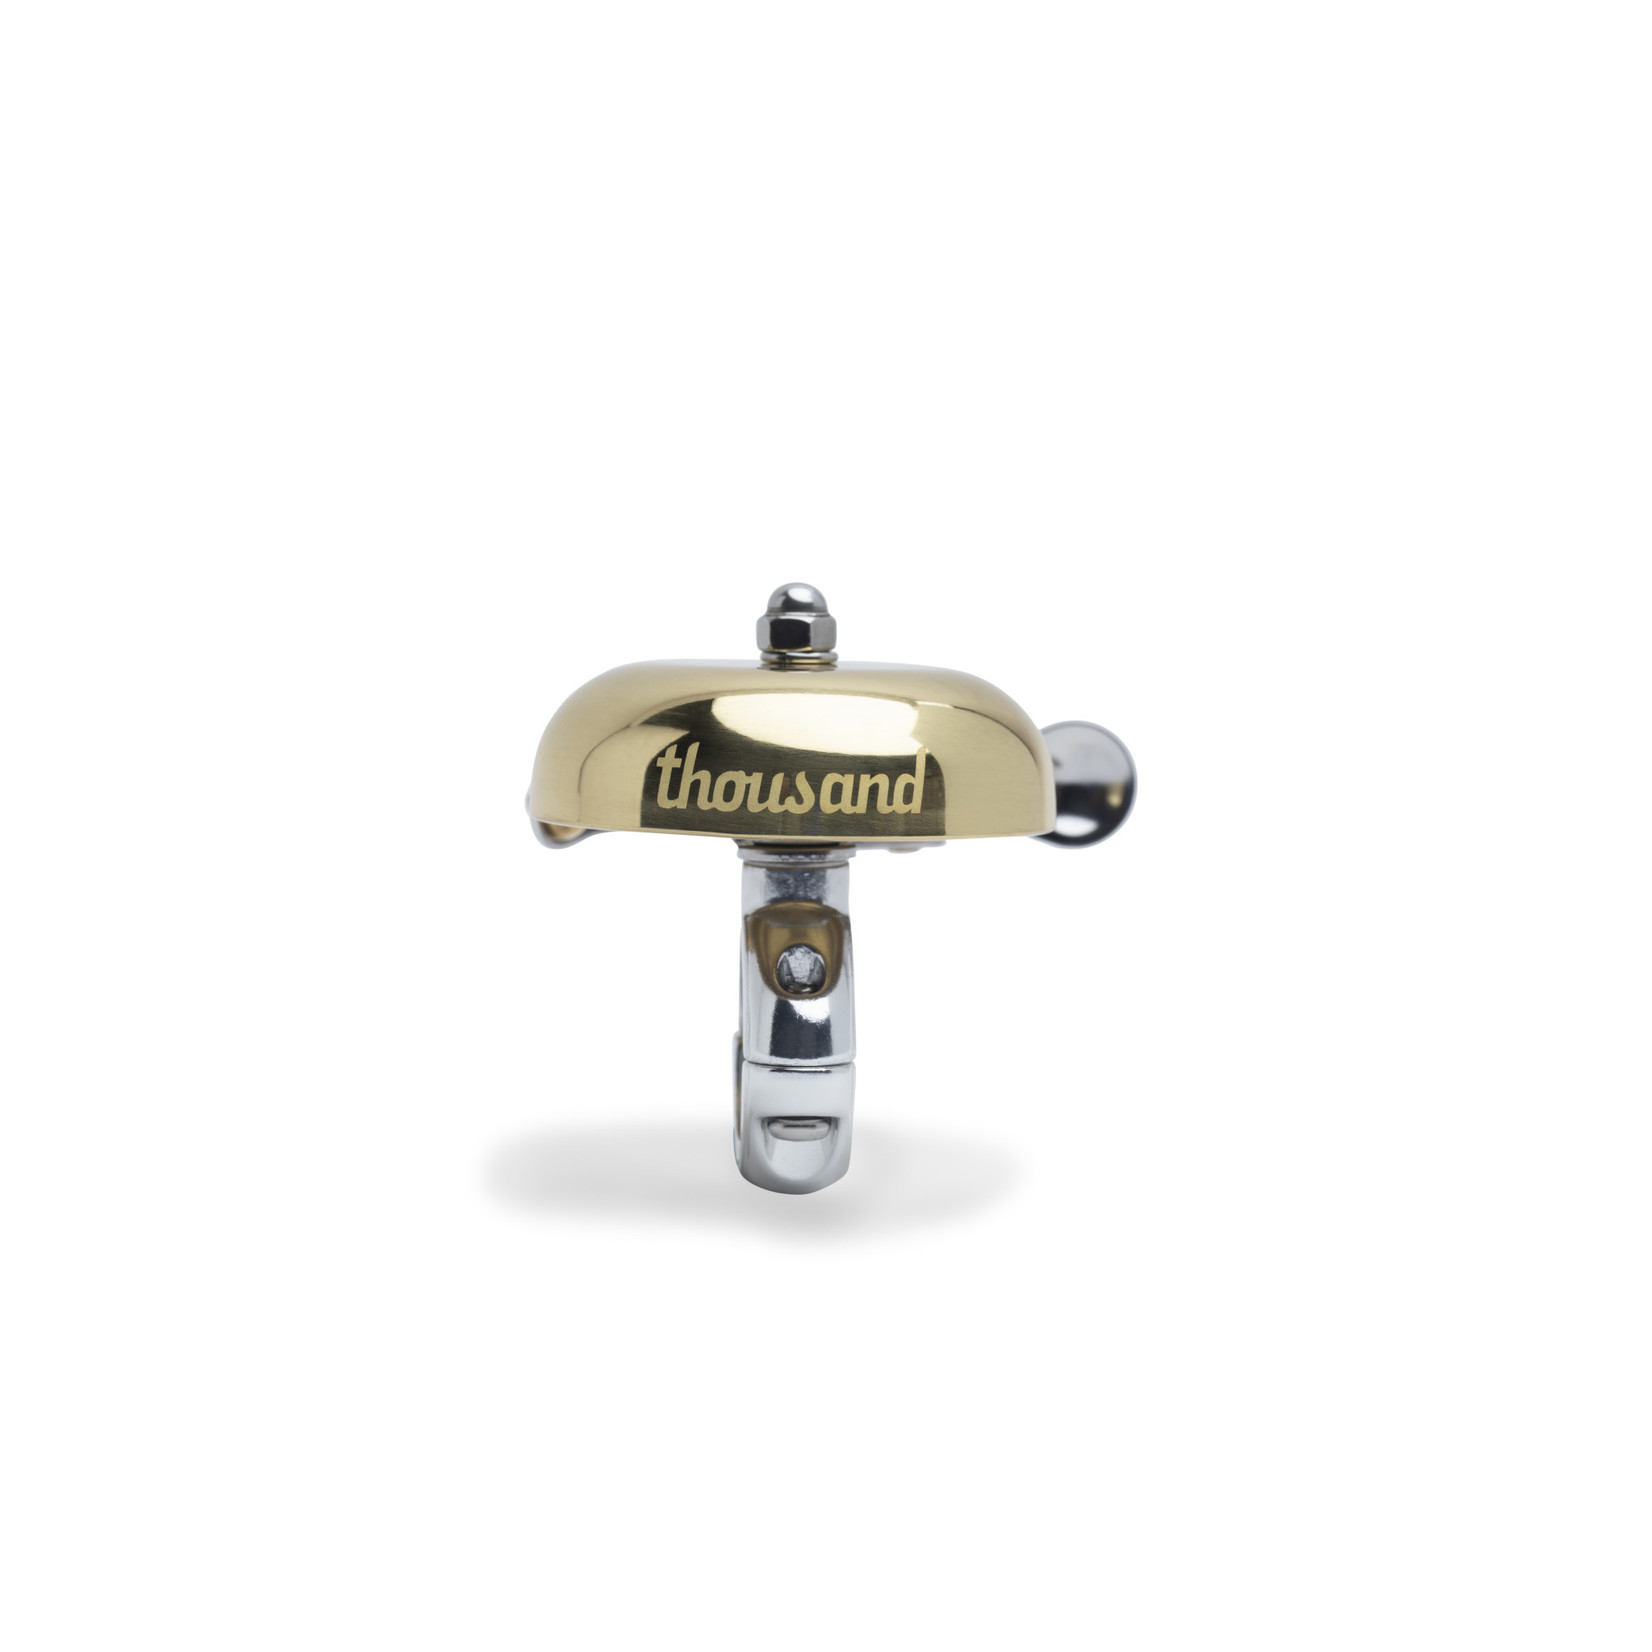 Thousand Thousand Pennant Bicycle Bell - Brass